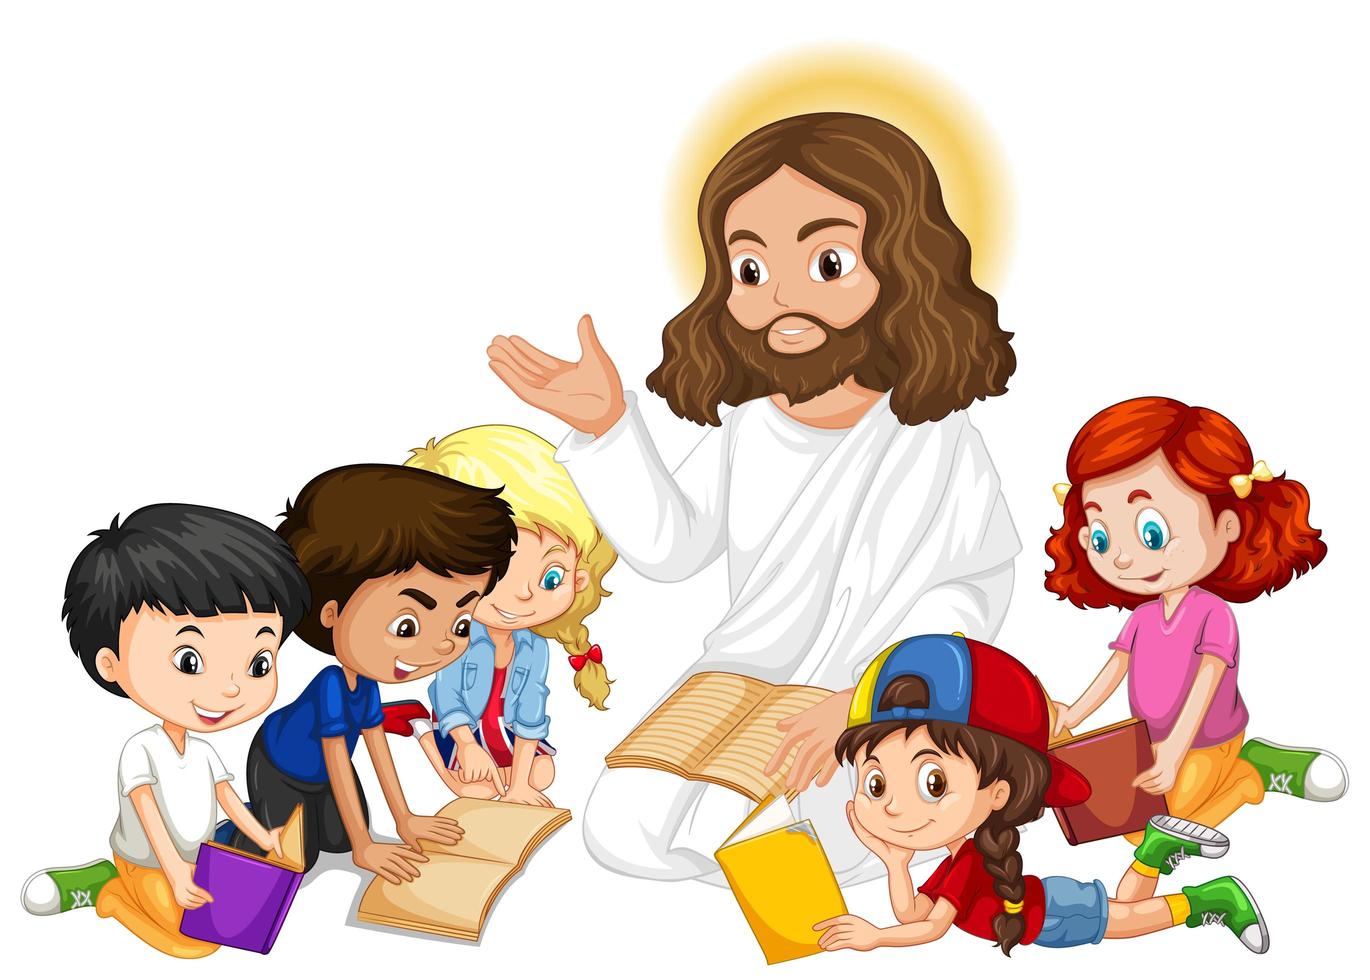 Jesus teaching a young group of kids vector